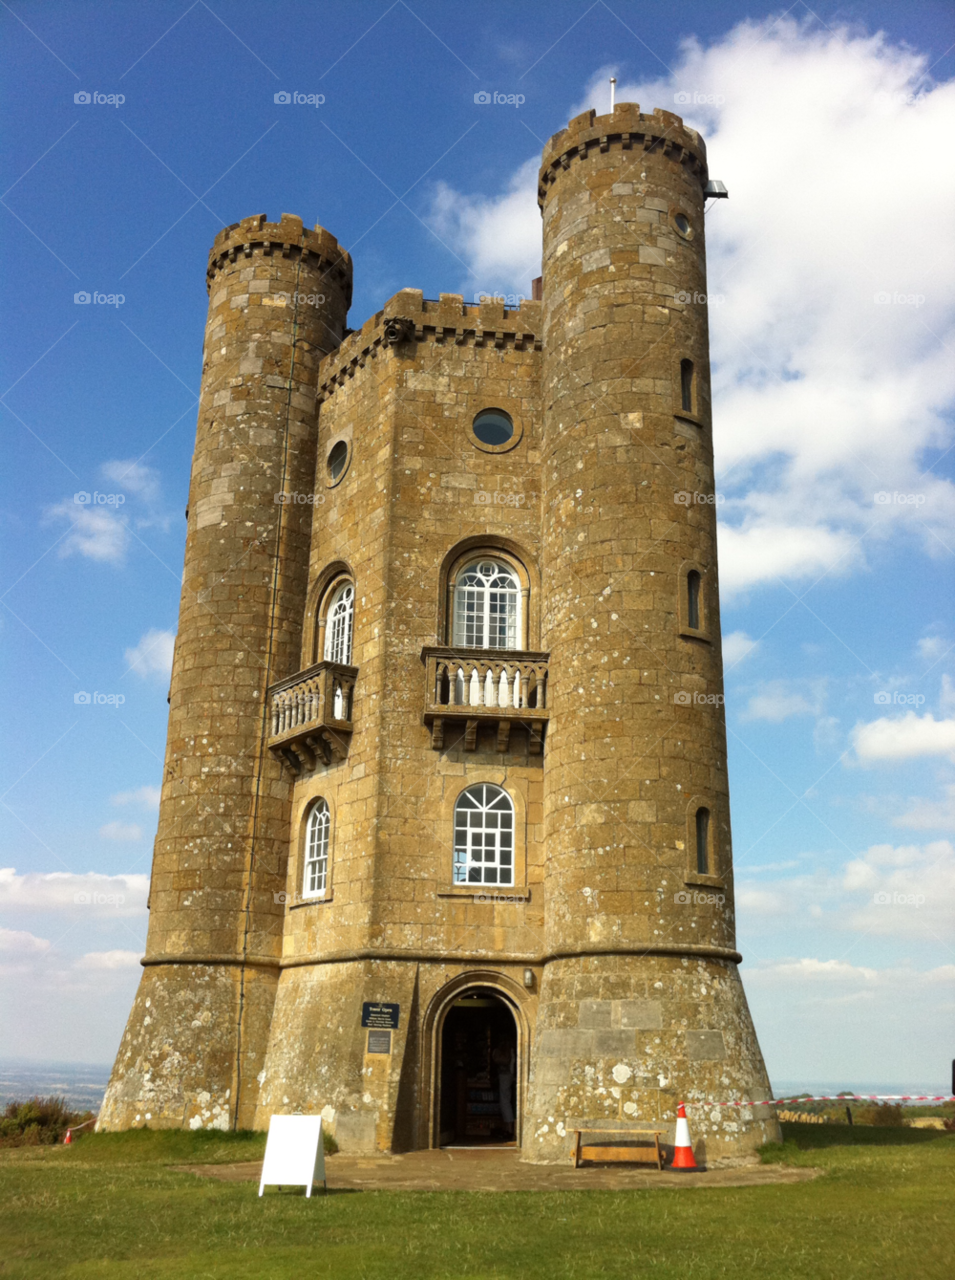 castle broadway folly broadway tower by maryj